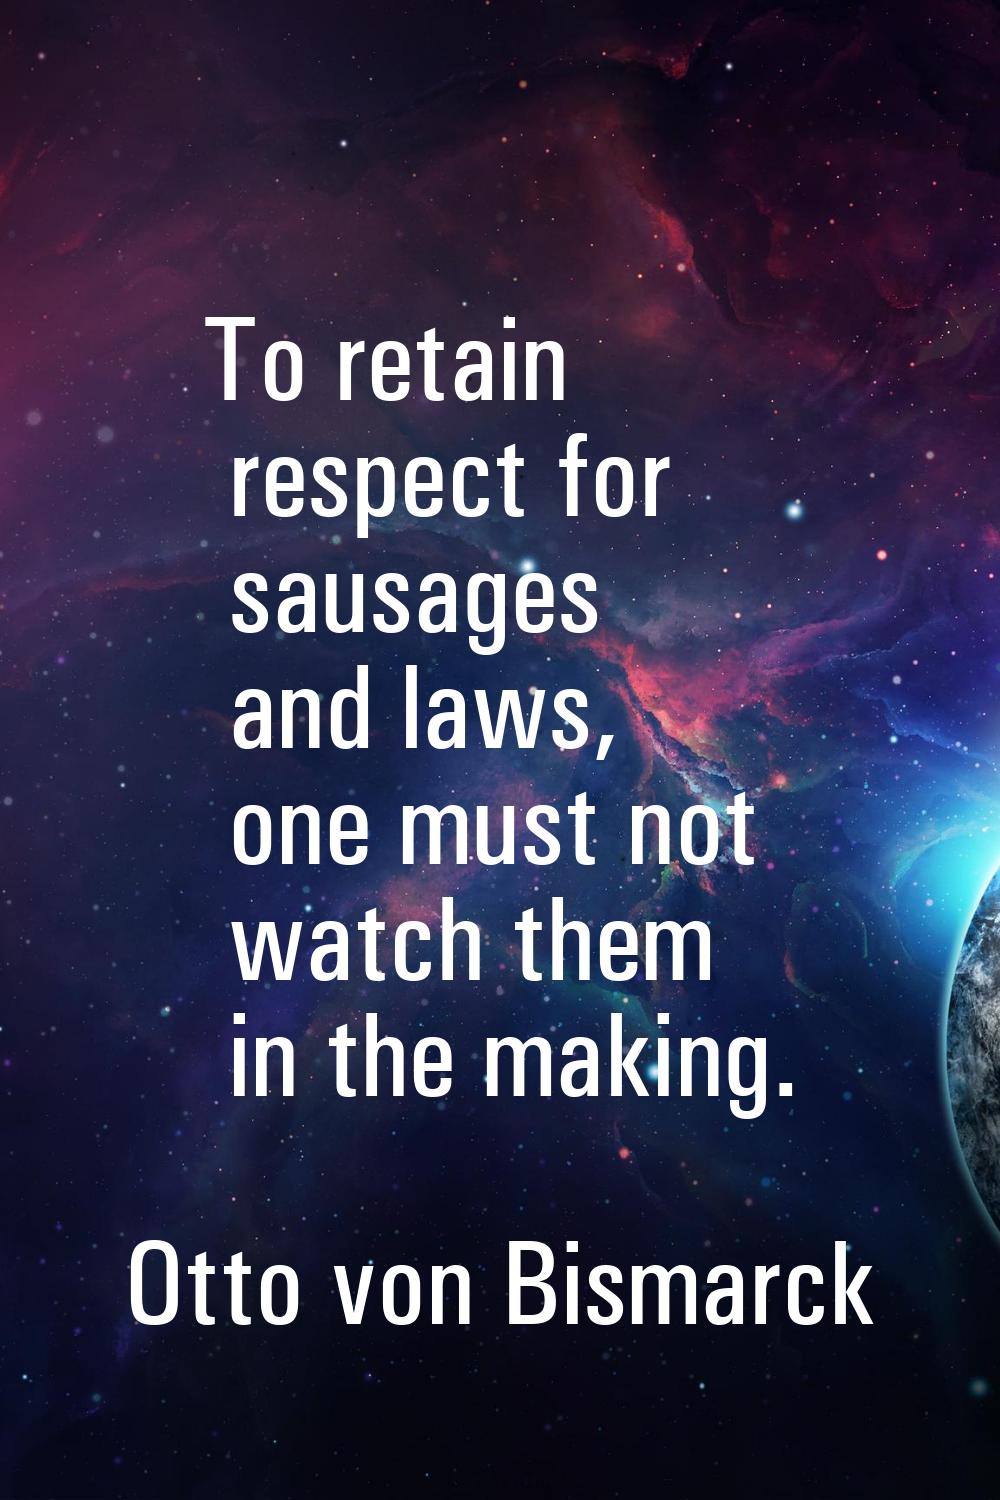 To retain respect for sausages and laws, one must not watch them in the making.